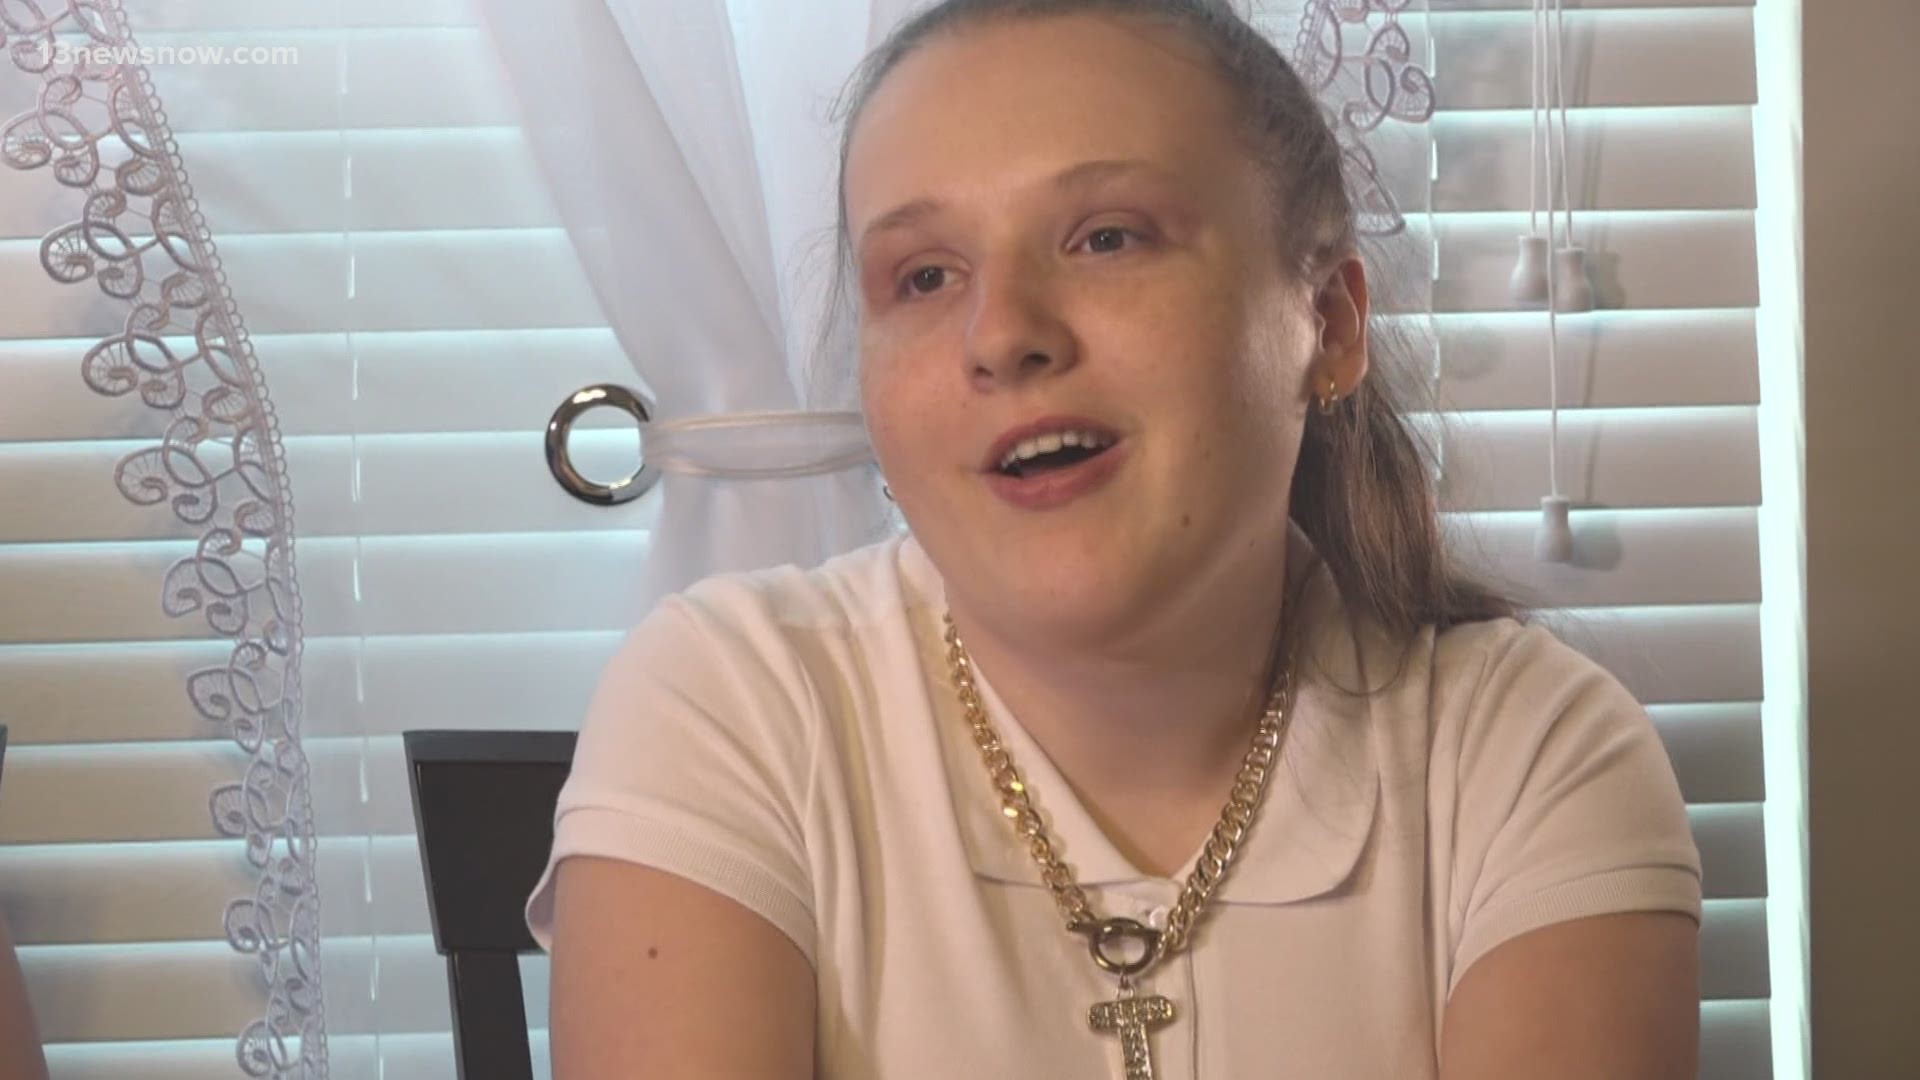 A North Carolina teenager won $125,000 in the state's second vaccine lottery. And she says she couldn't be more excited for her next steps.